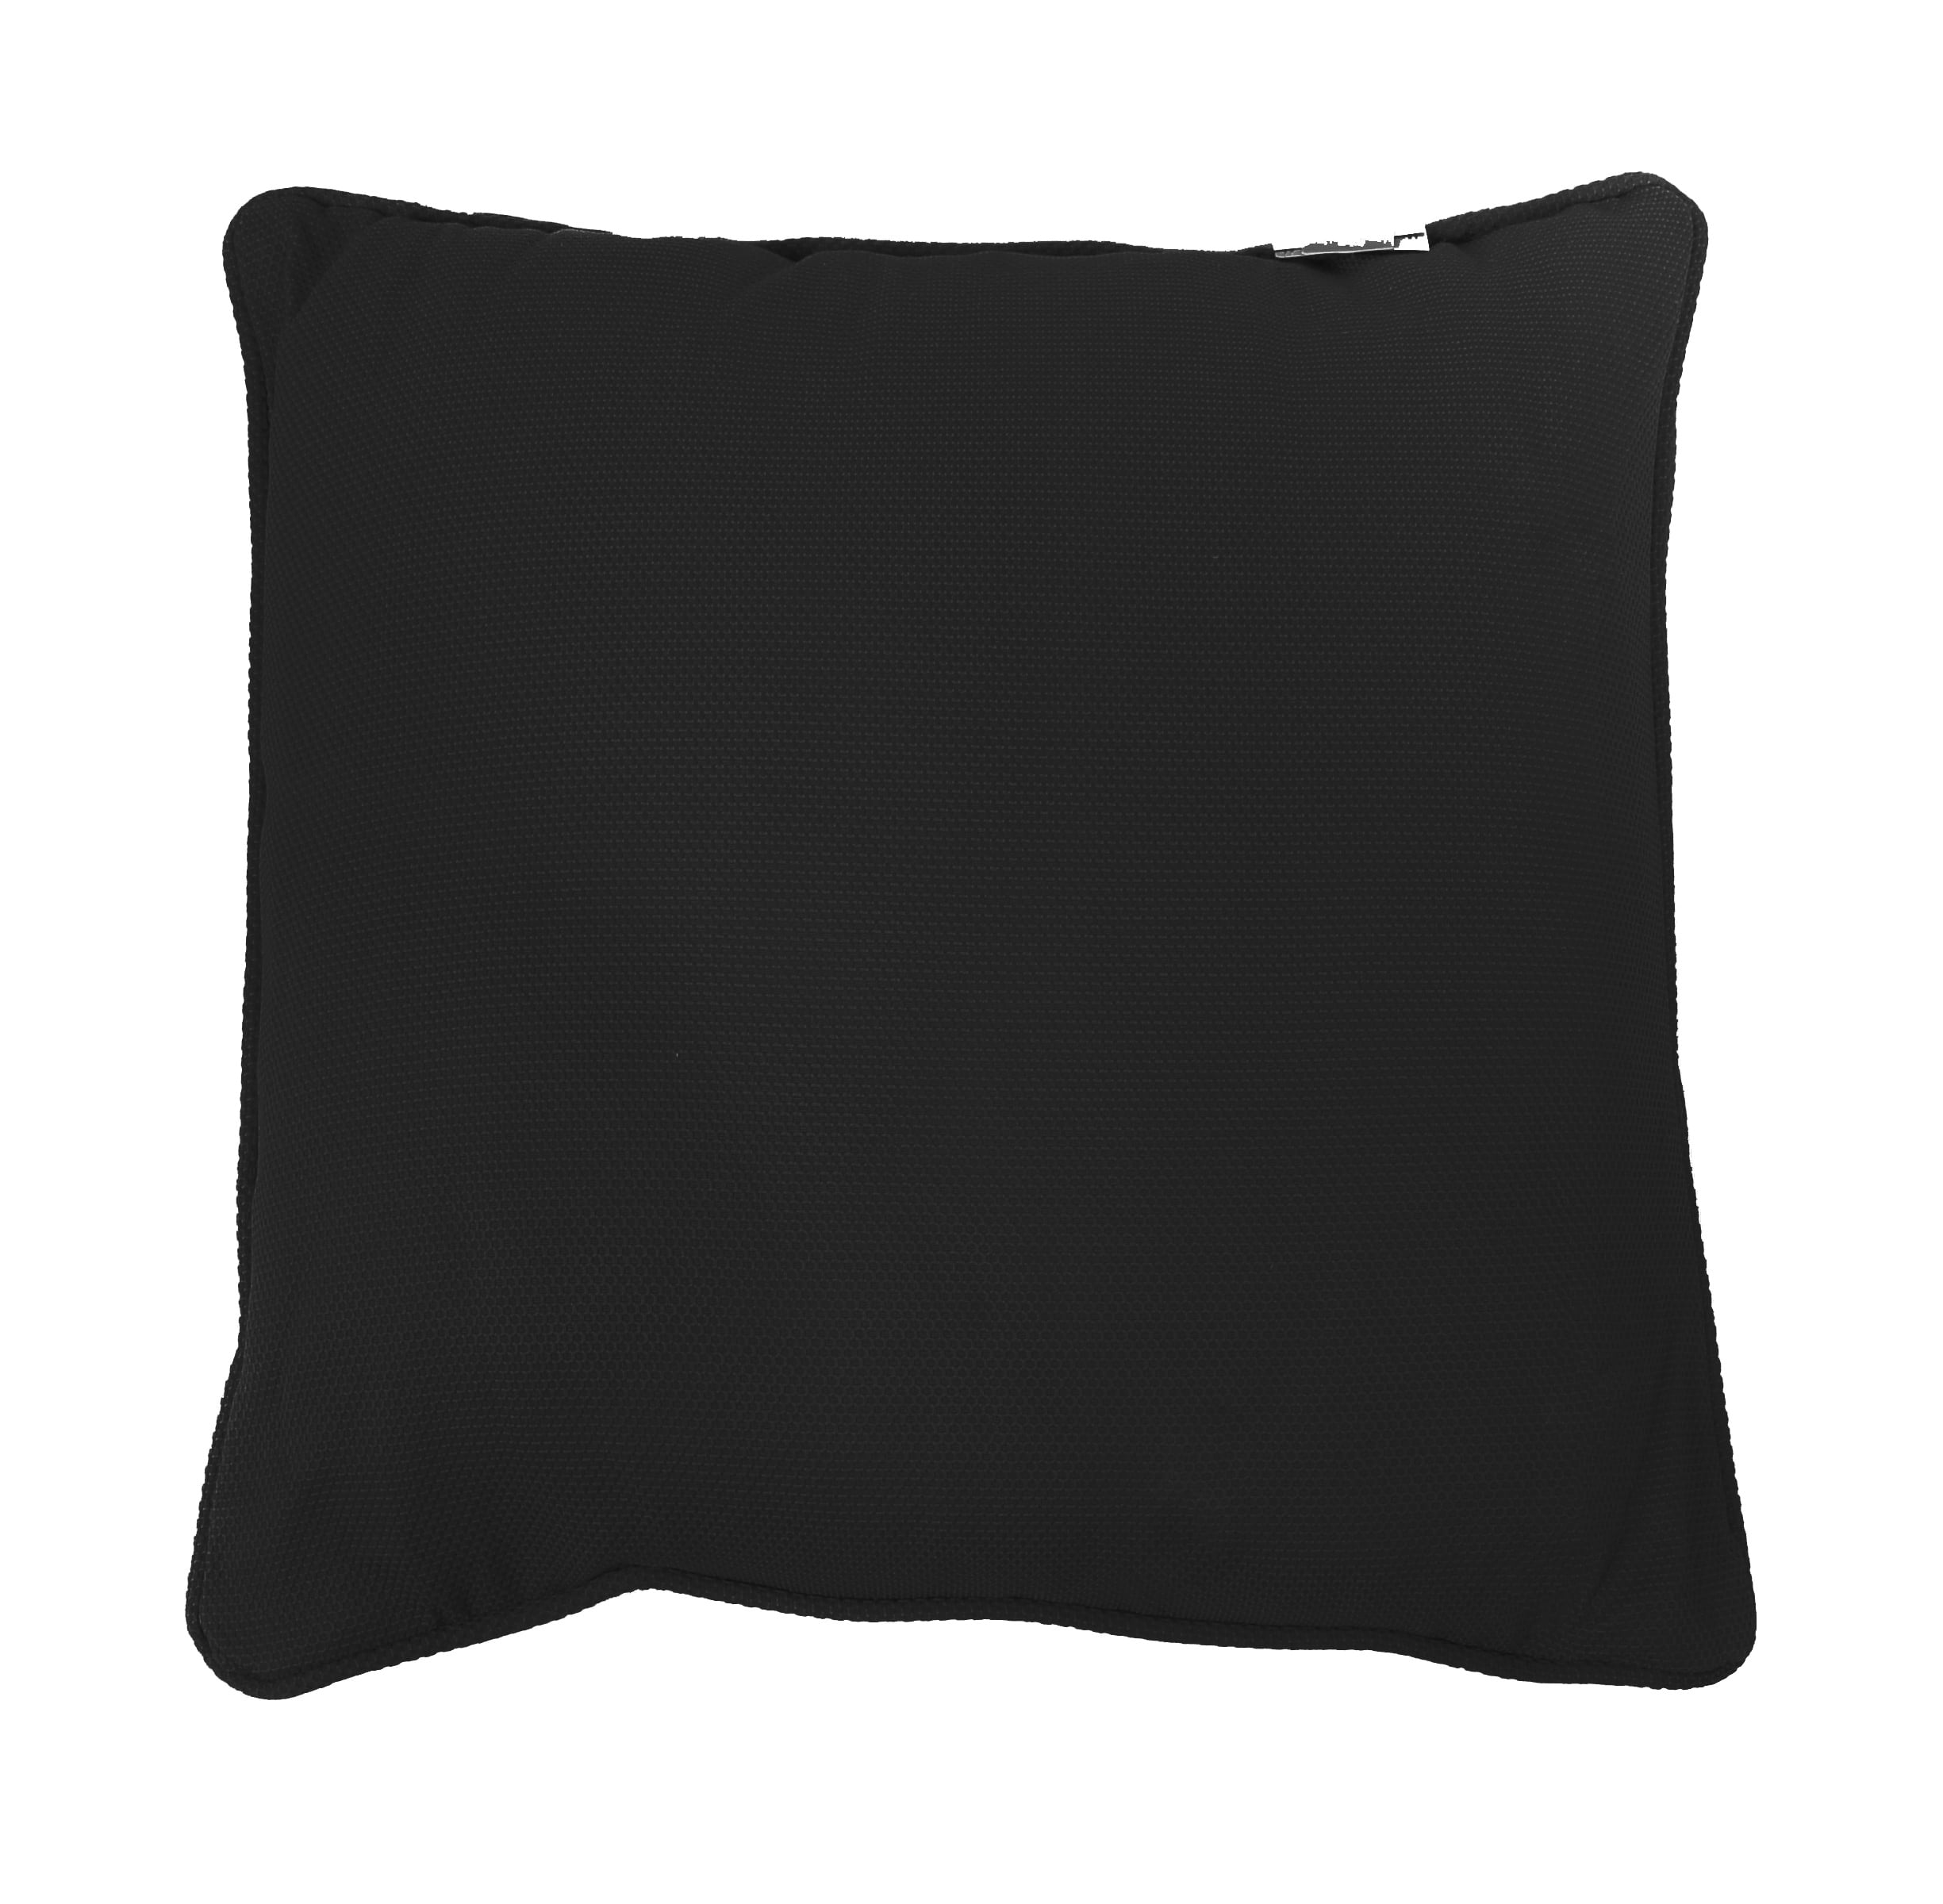 solid decorative pillows